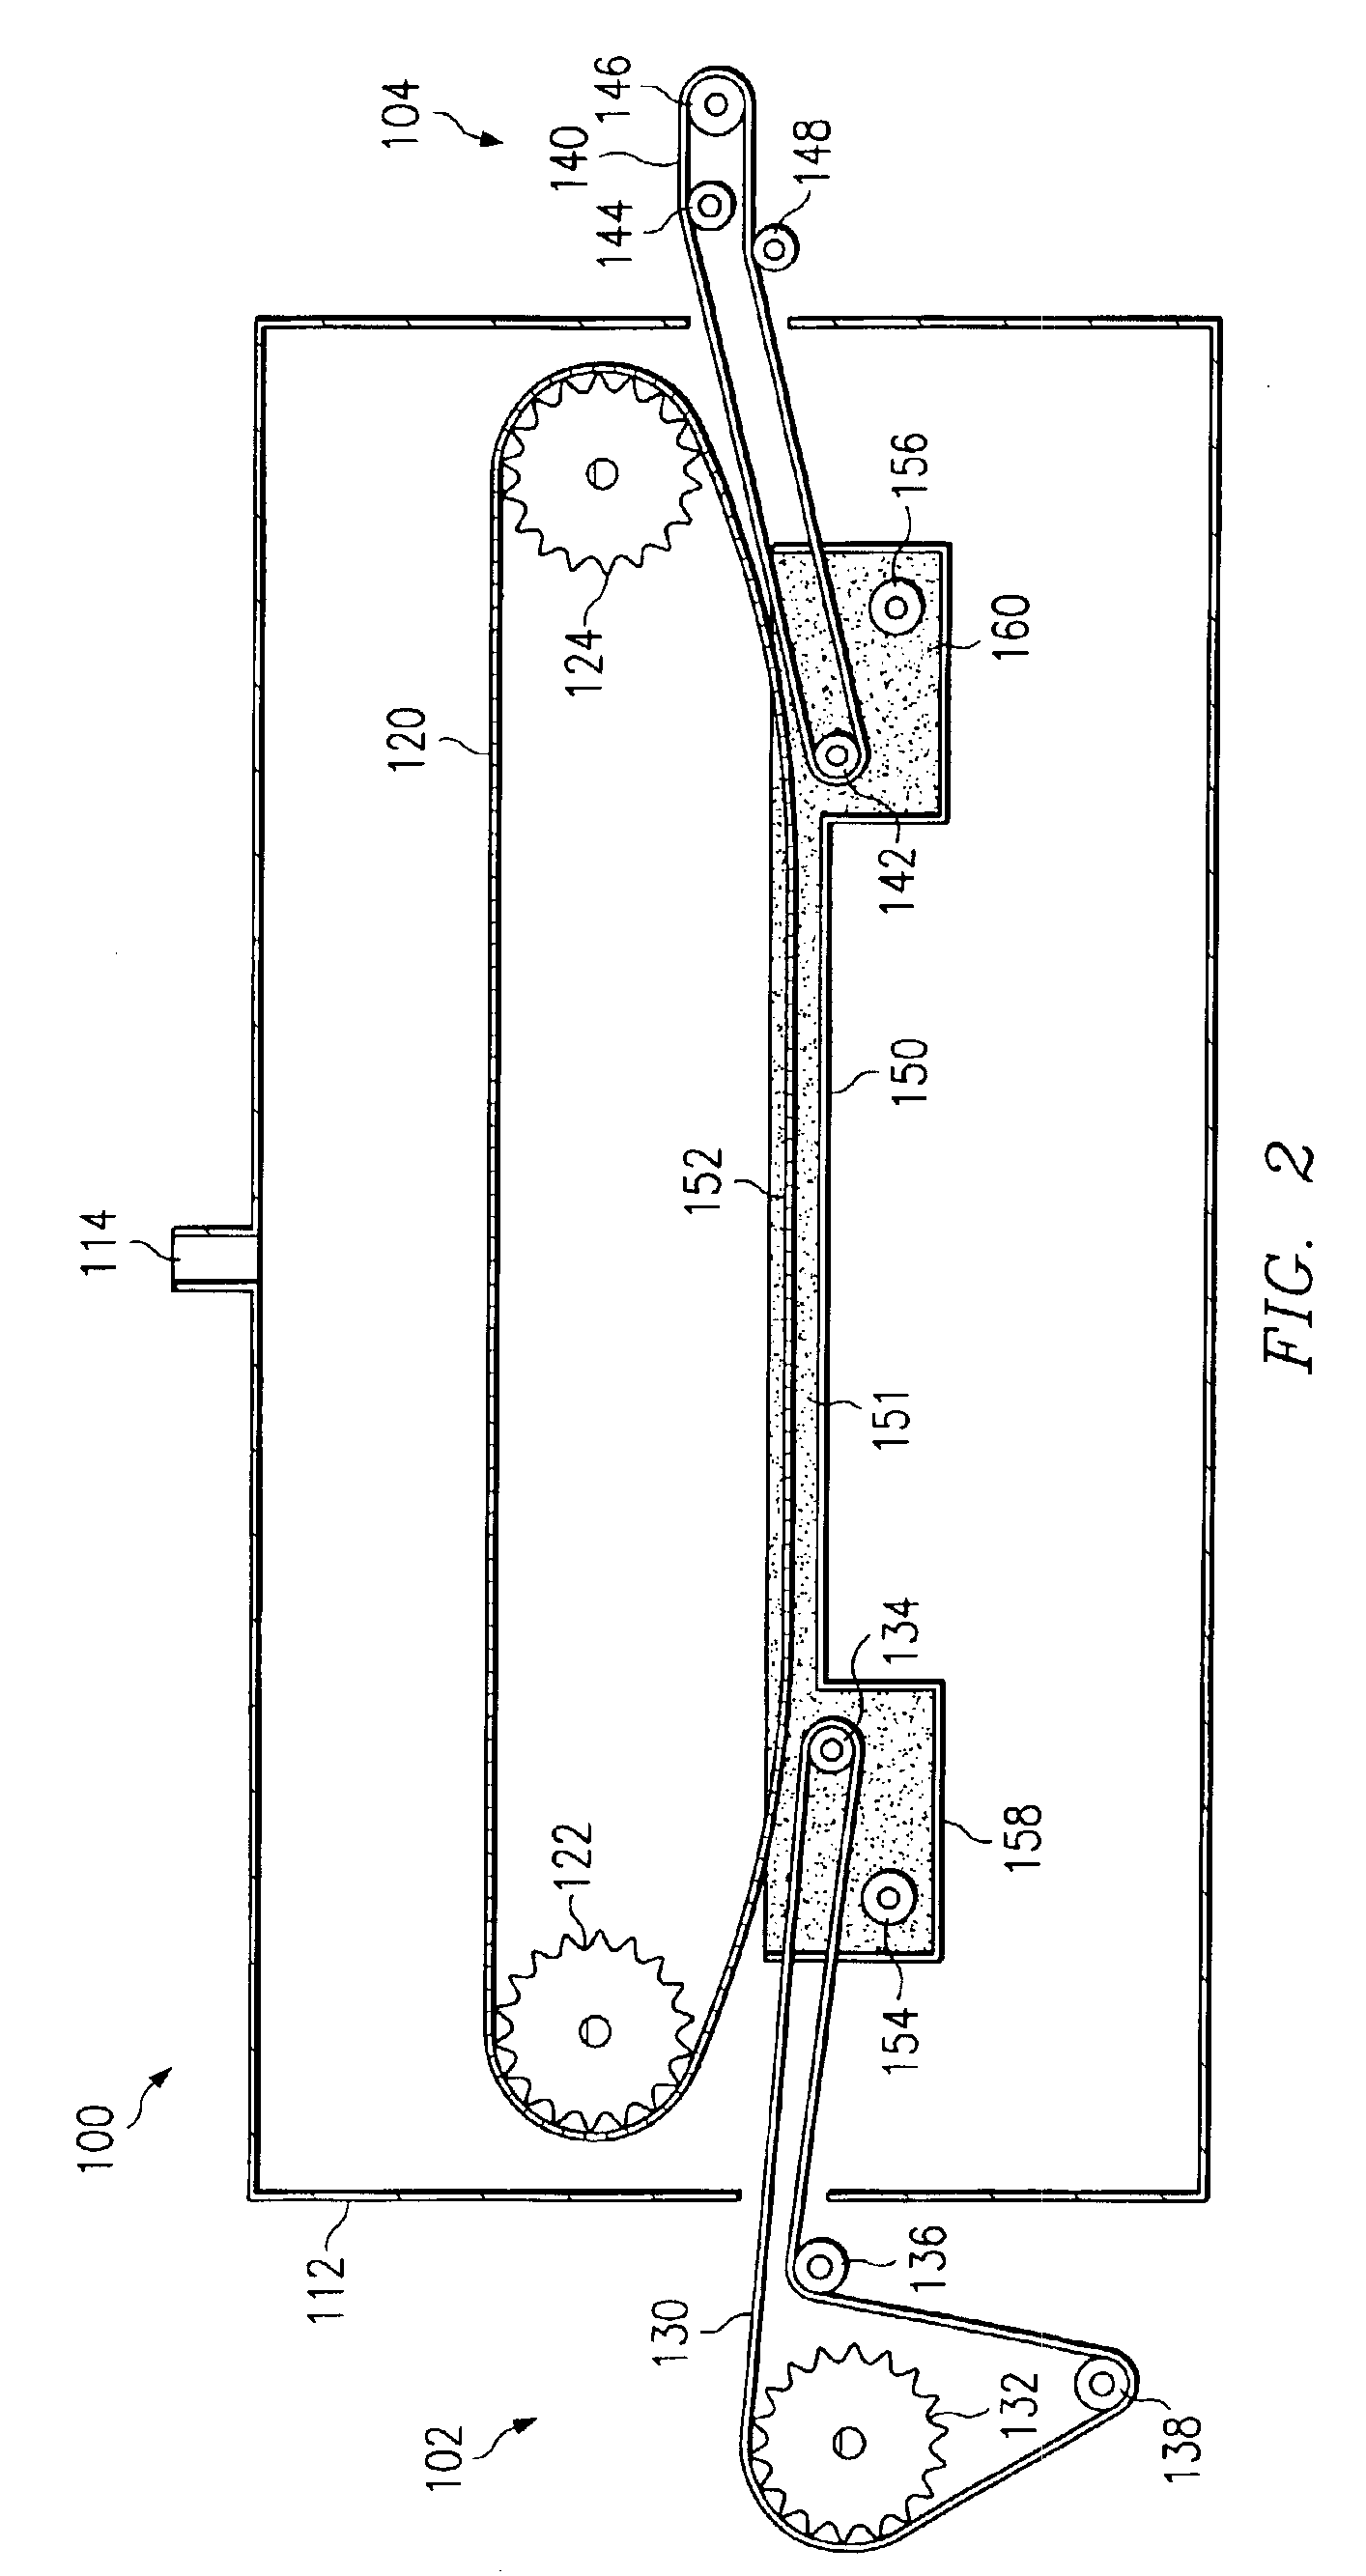 Single mold form fryer with enhanced product control